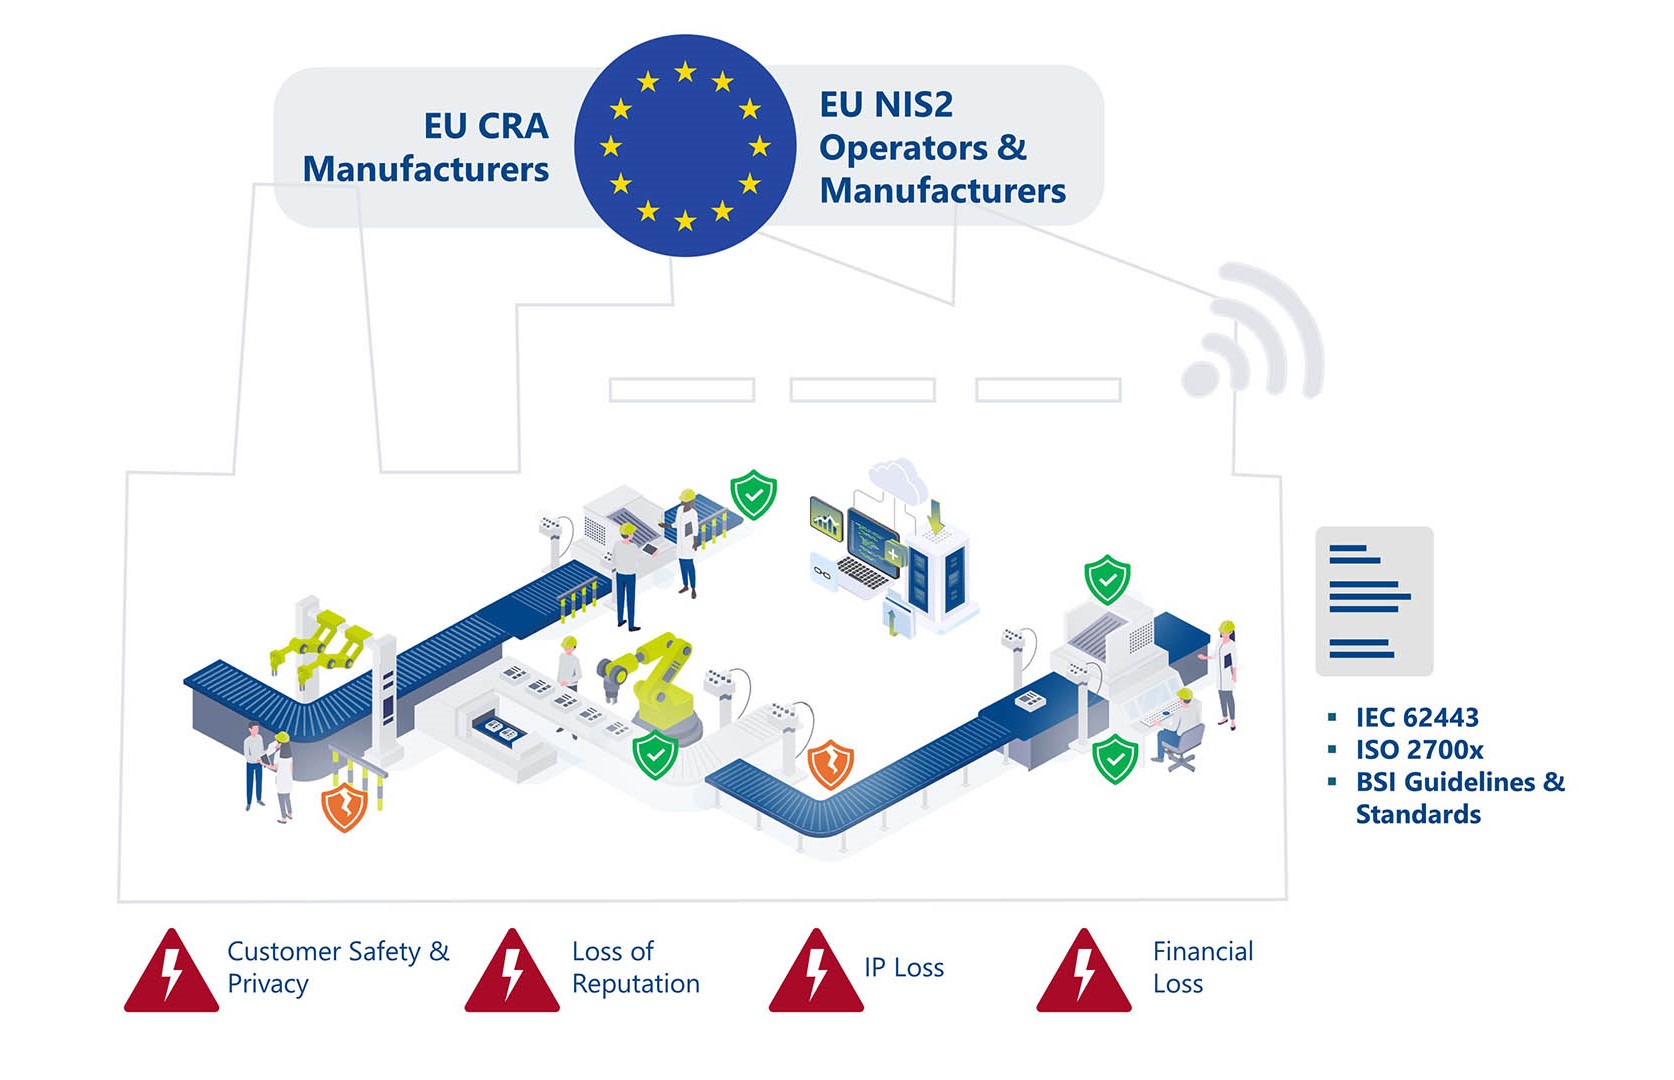 Illustration showing cyber security risks for manufacturers and operators as well as requirements of the new regulations CRA and NIS 2.